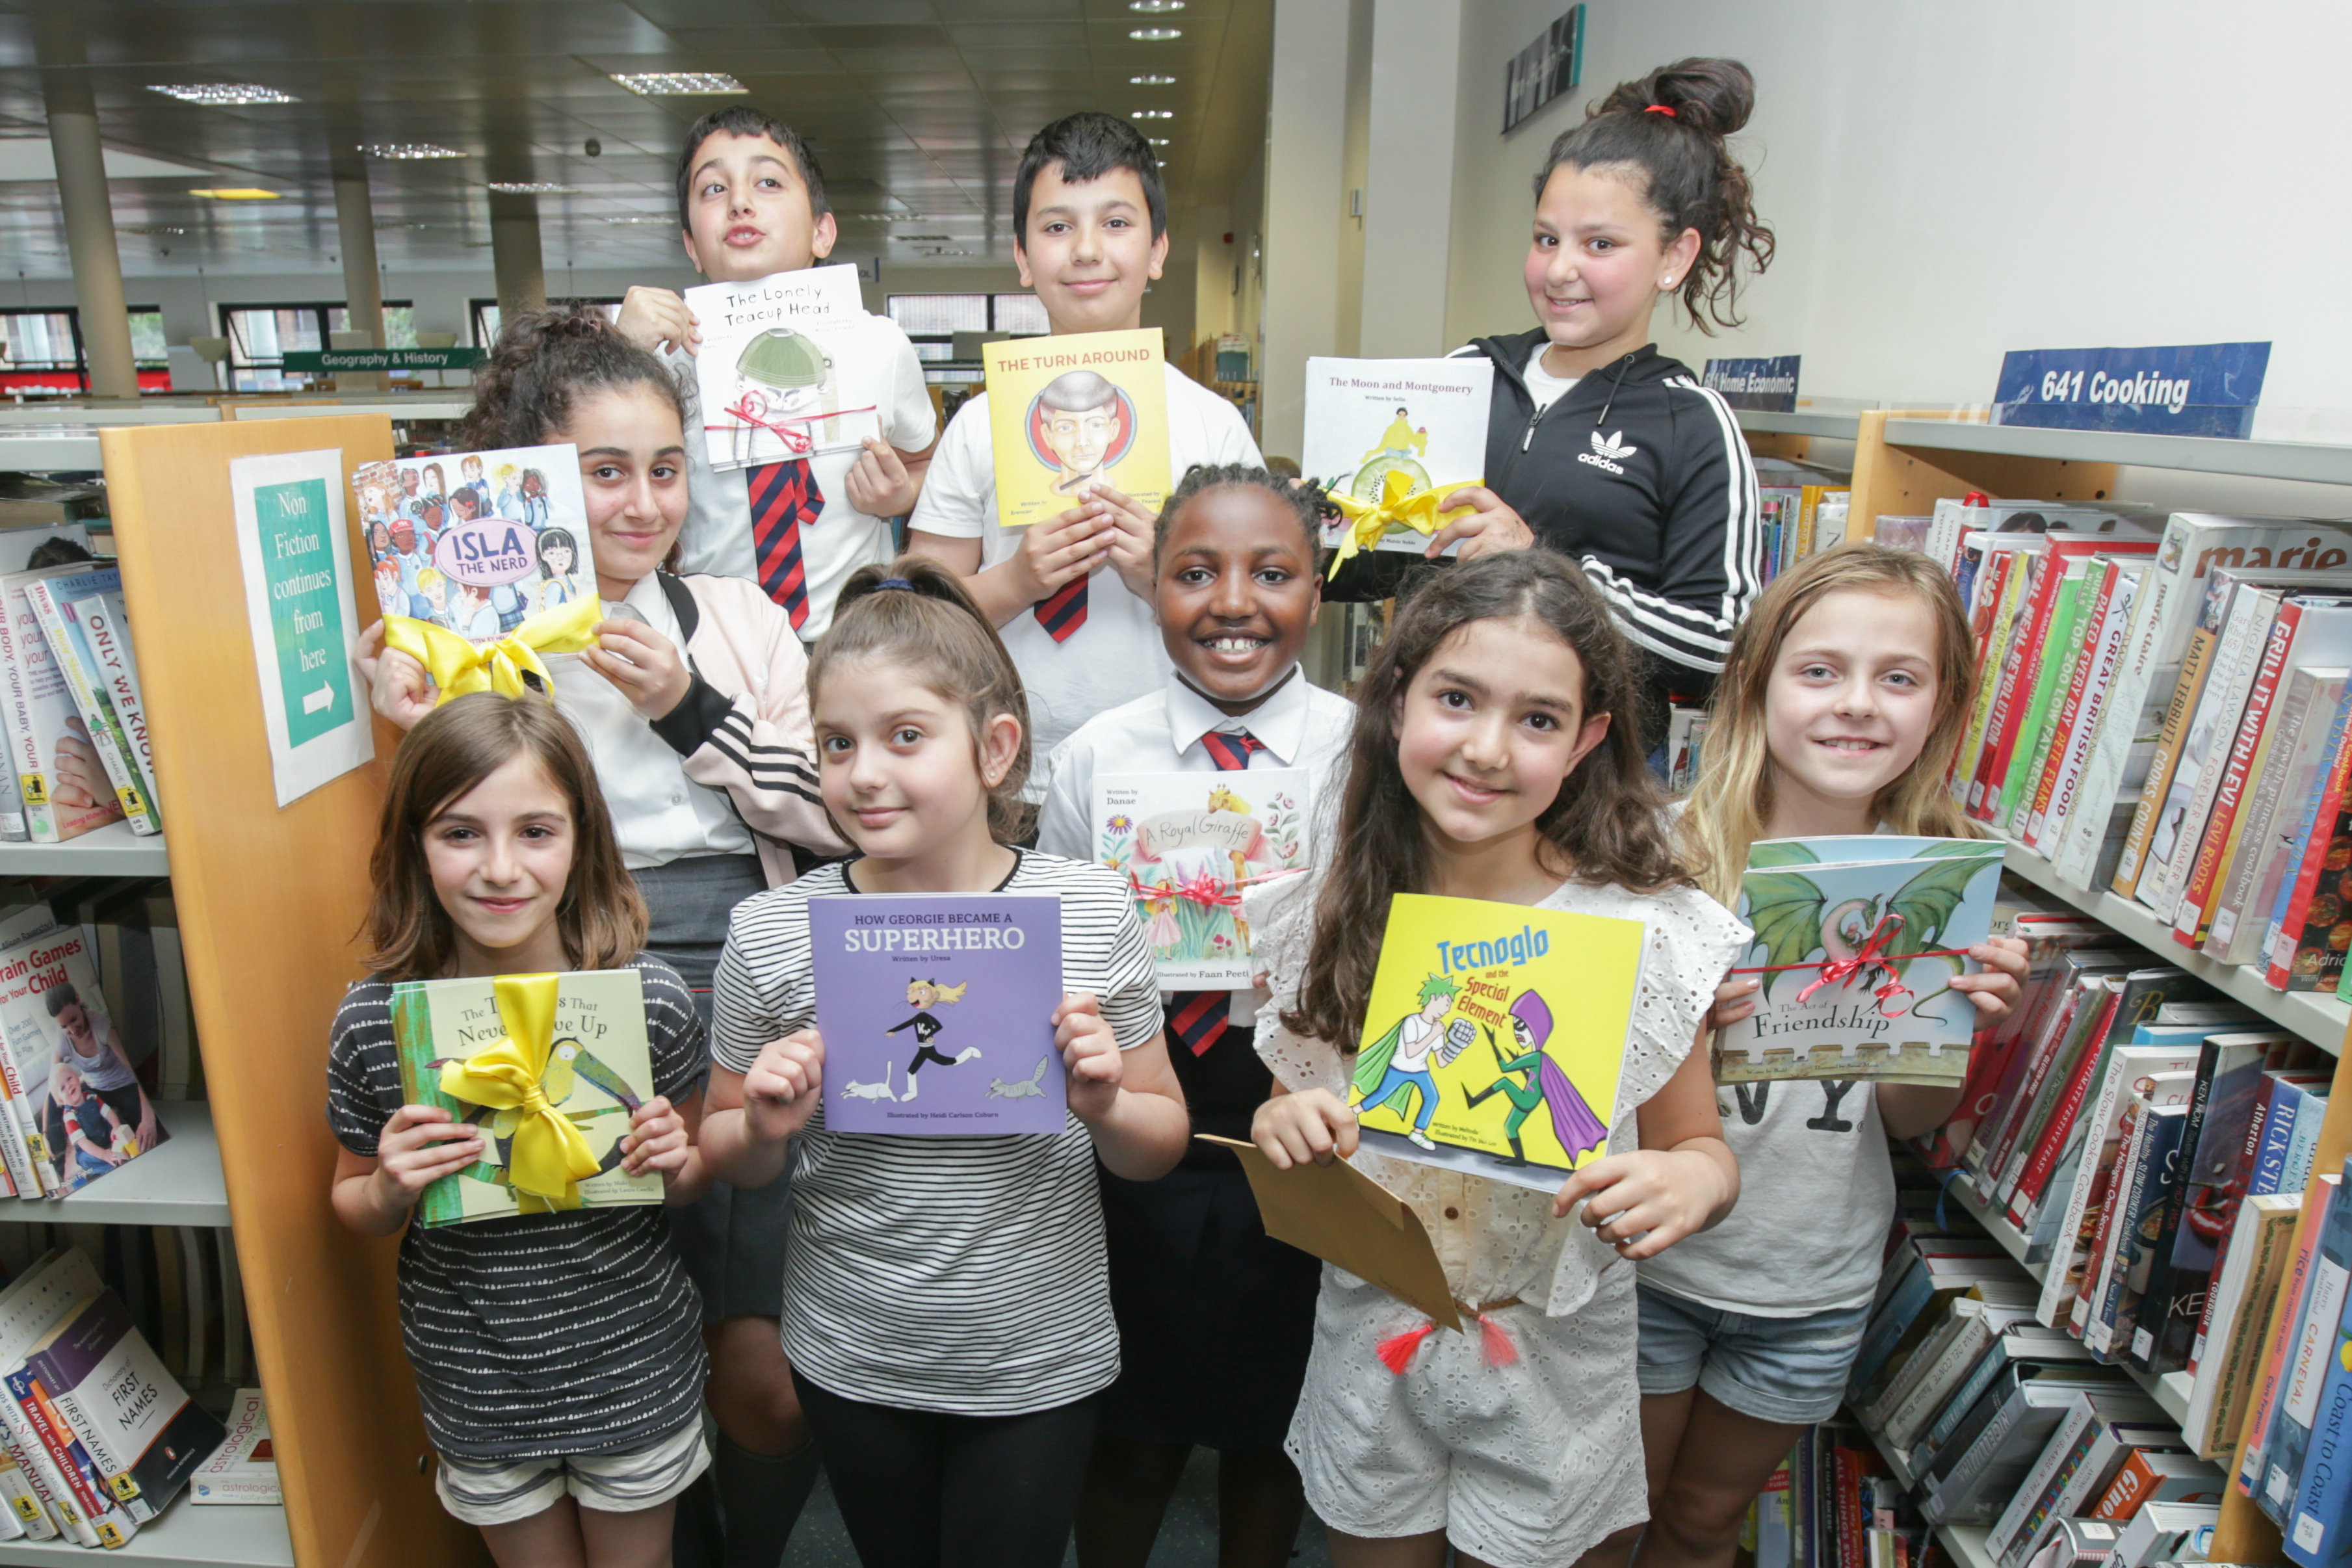 17 children wrote their own picture books which were brought to life by volunteer illustrators 